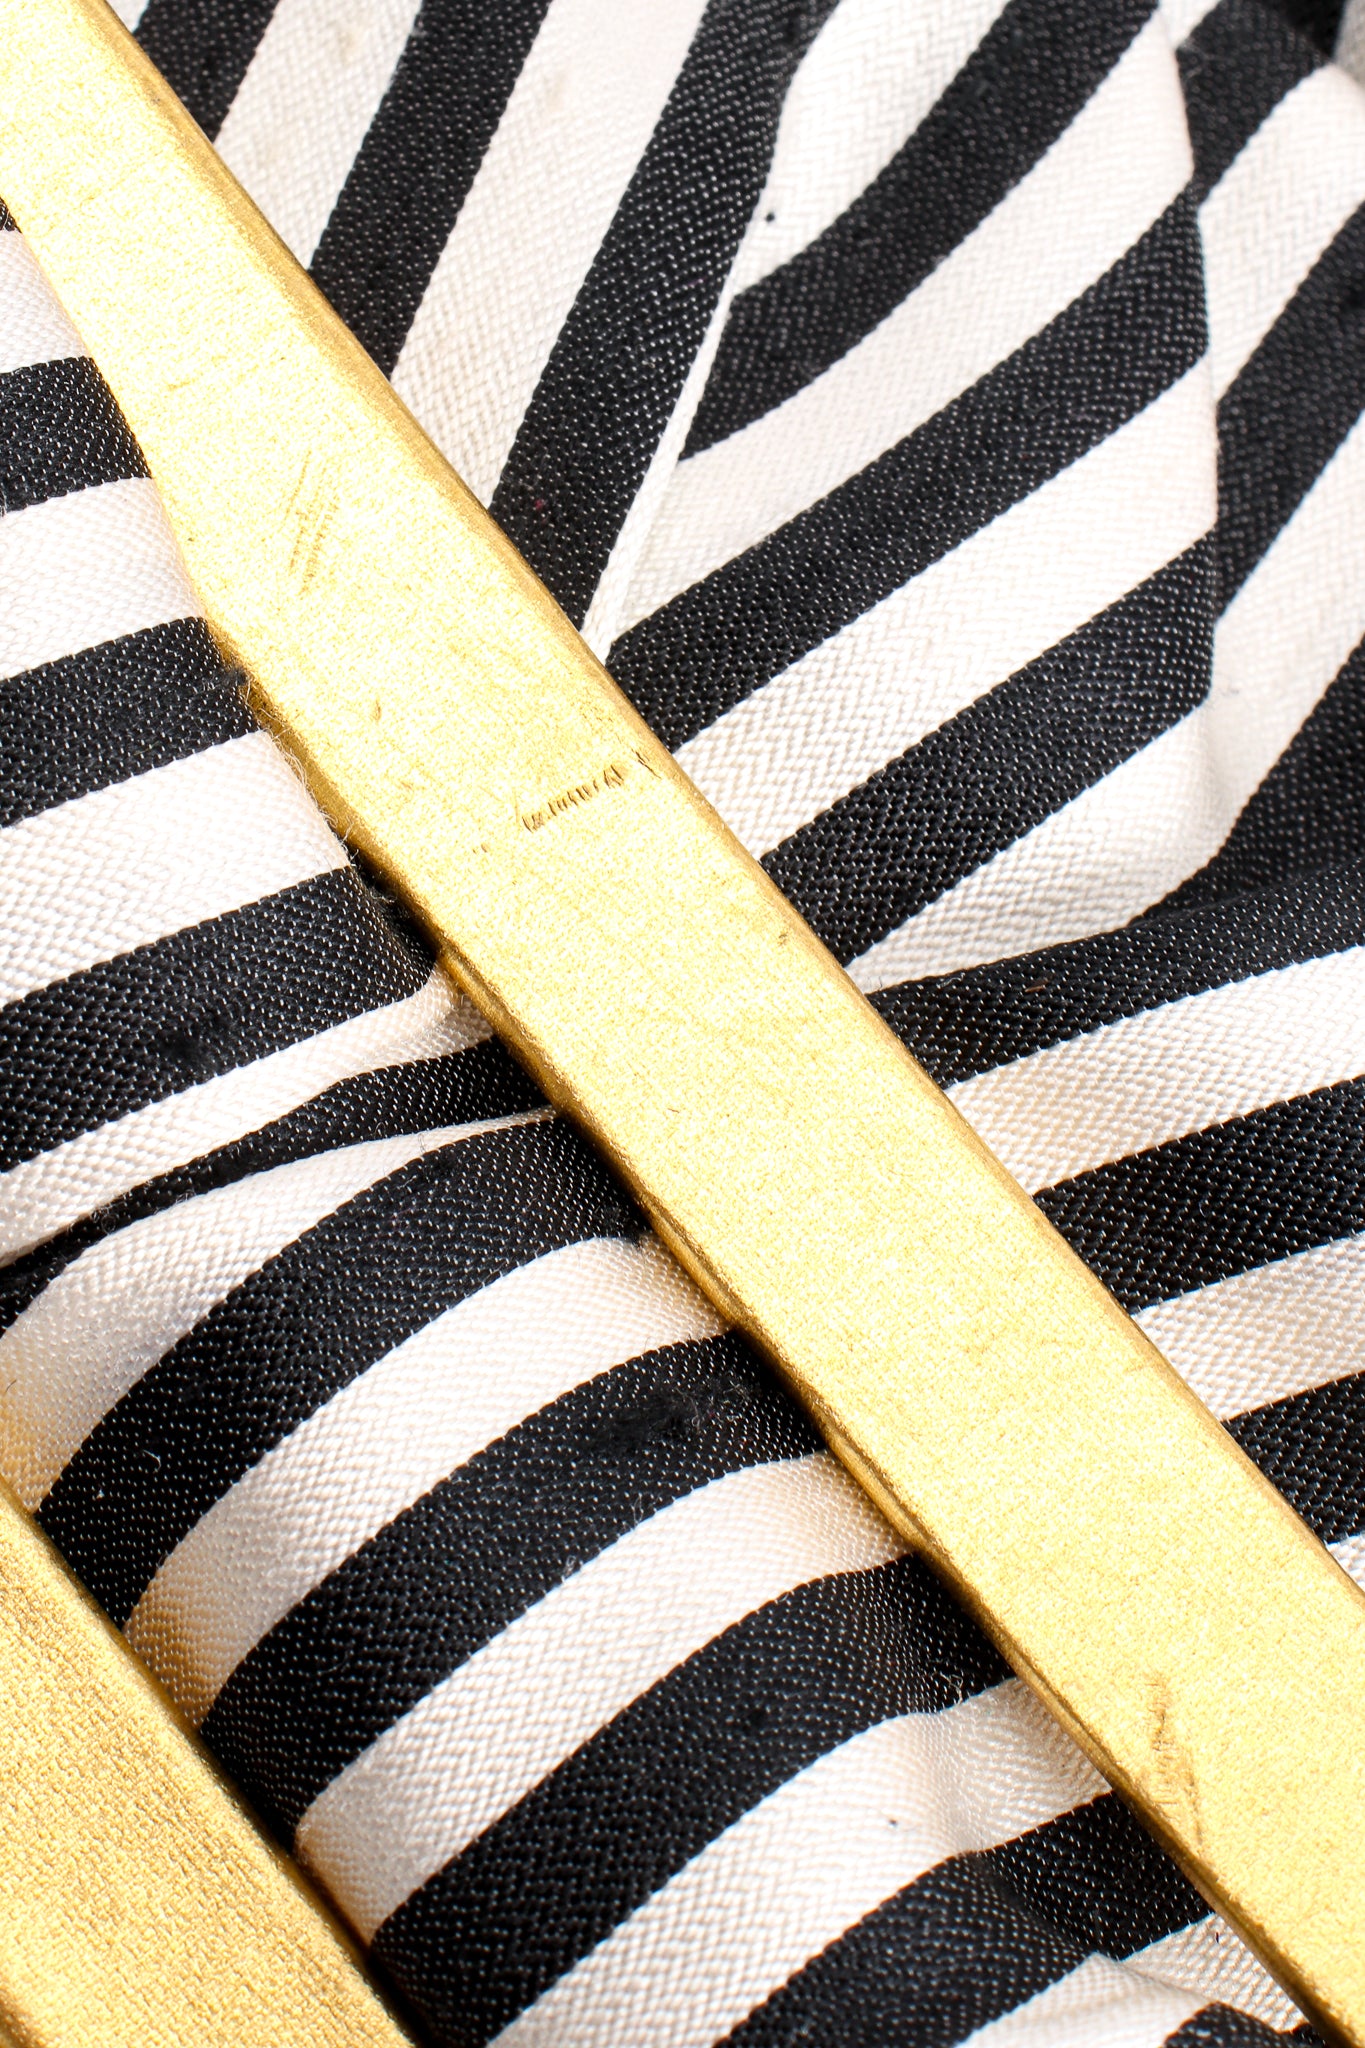 Vintage Paloma Picasso Striped Silk Bow Belt buckle wear at Recess Los Angeles